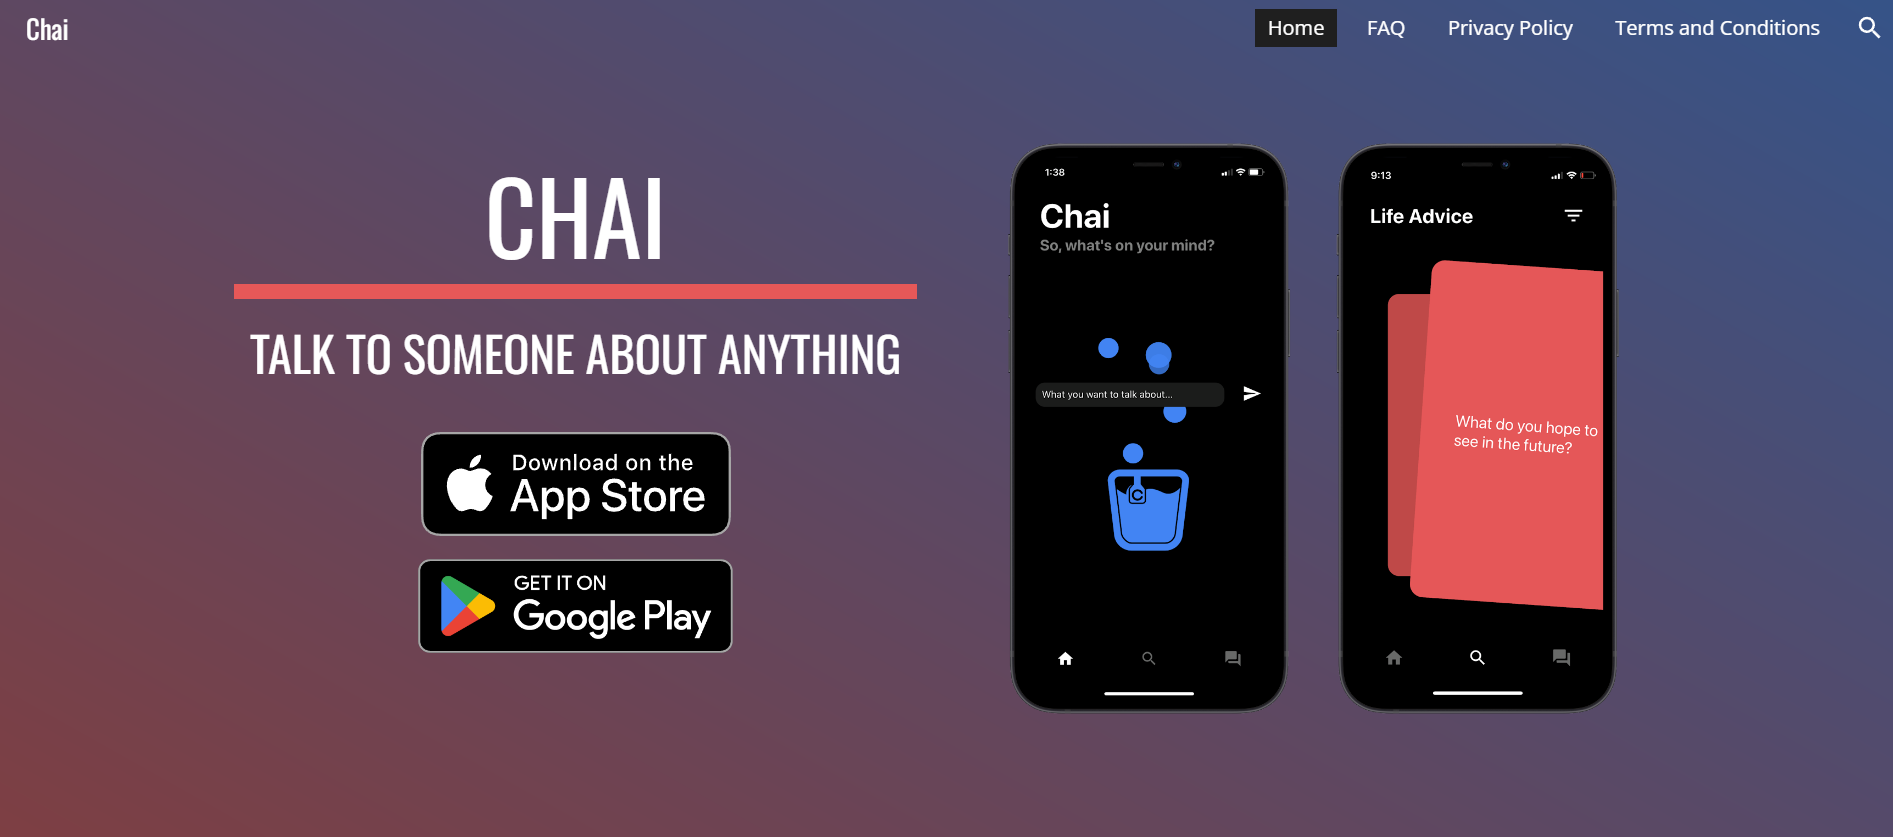 Chai App Overview